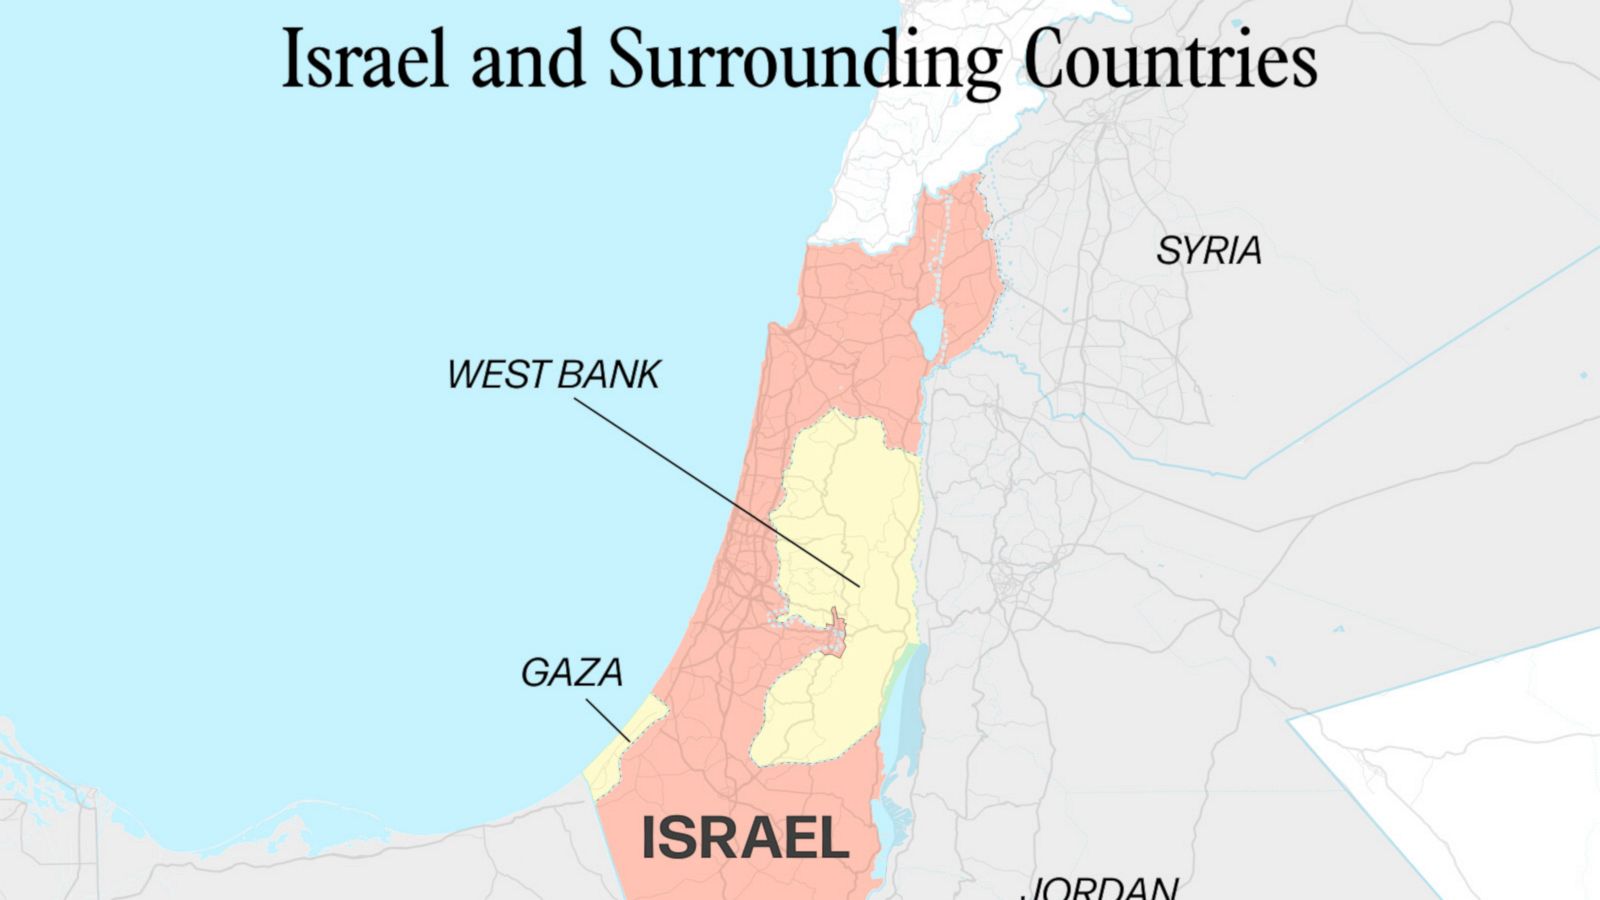 How Israel's geography, size put it in the center of decades of conflict - ABC News